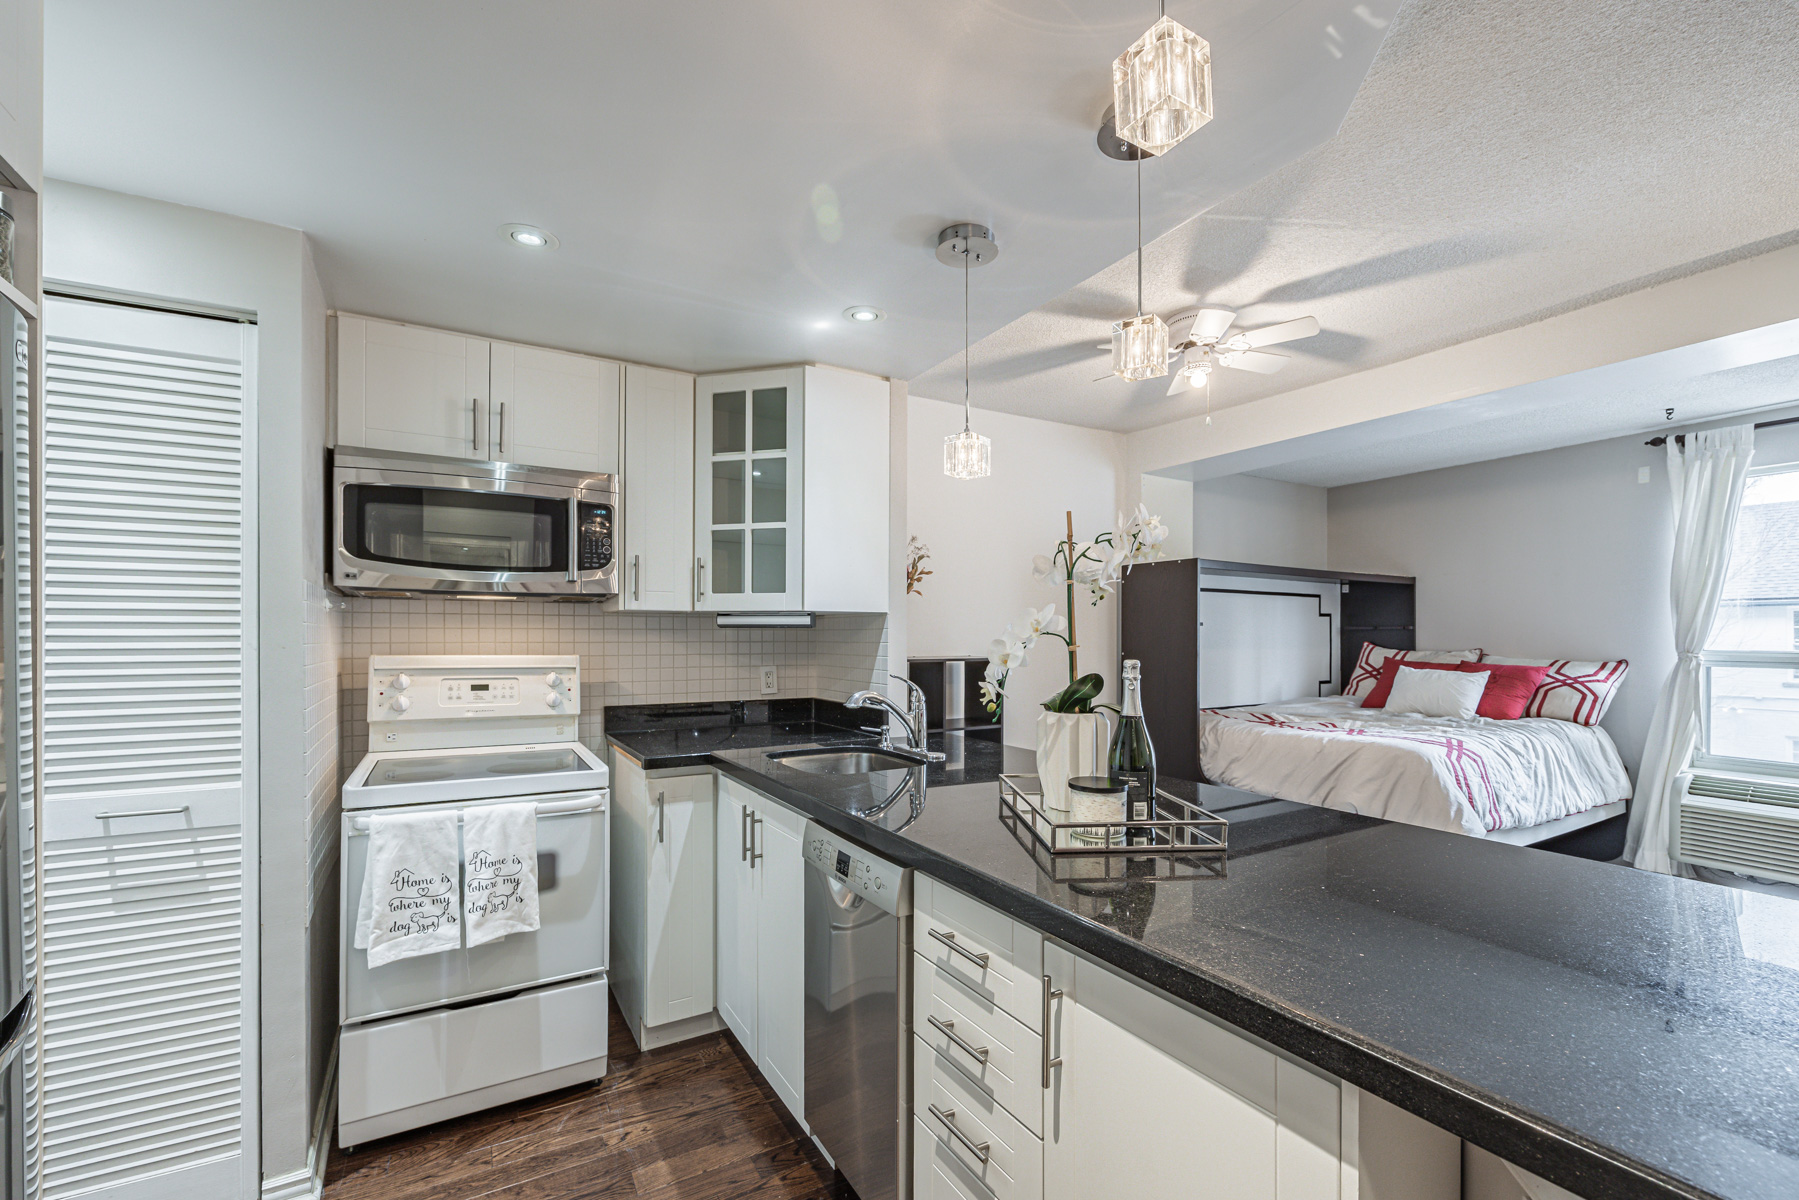 Condo kitchen with pendent lights and pot lights – Suite 204 88 Charles St.